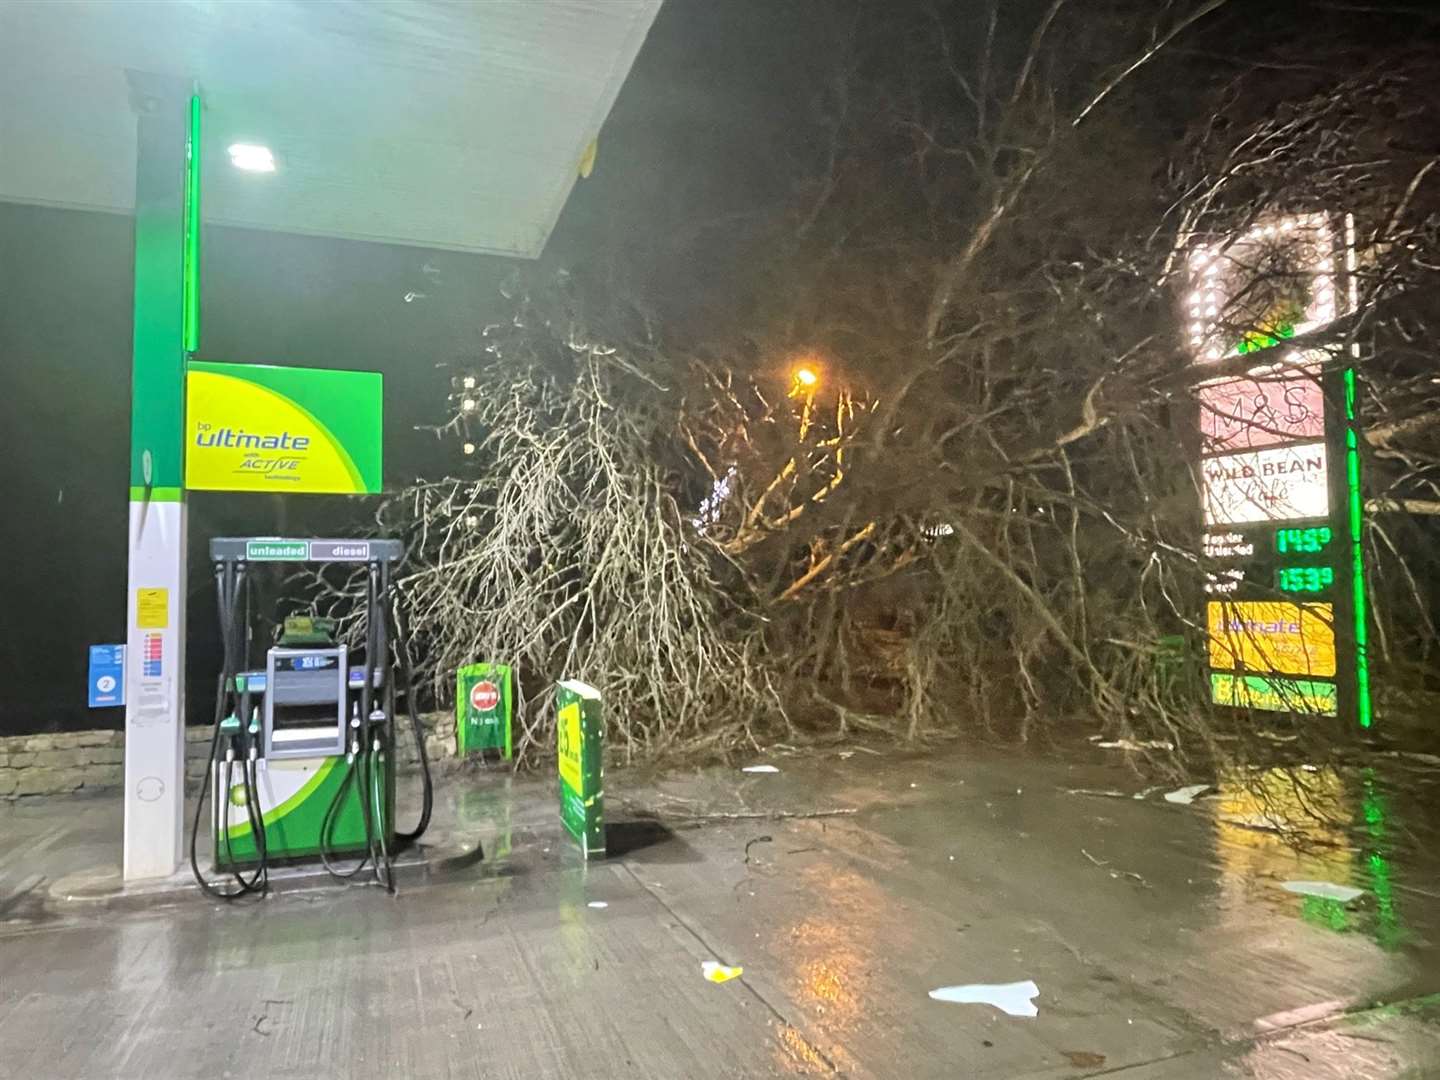 The entrance to the BP forecourt is completely blocked by the tree but the exit remains accessible.